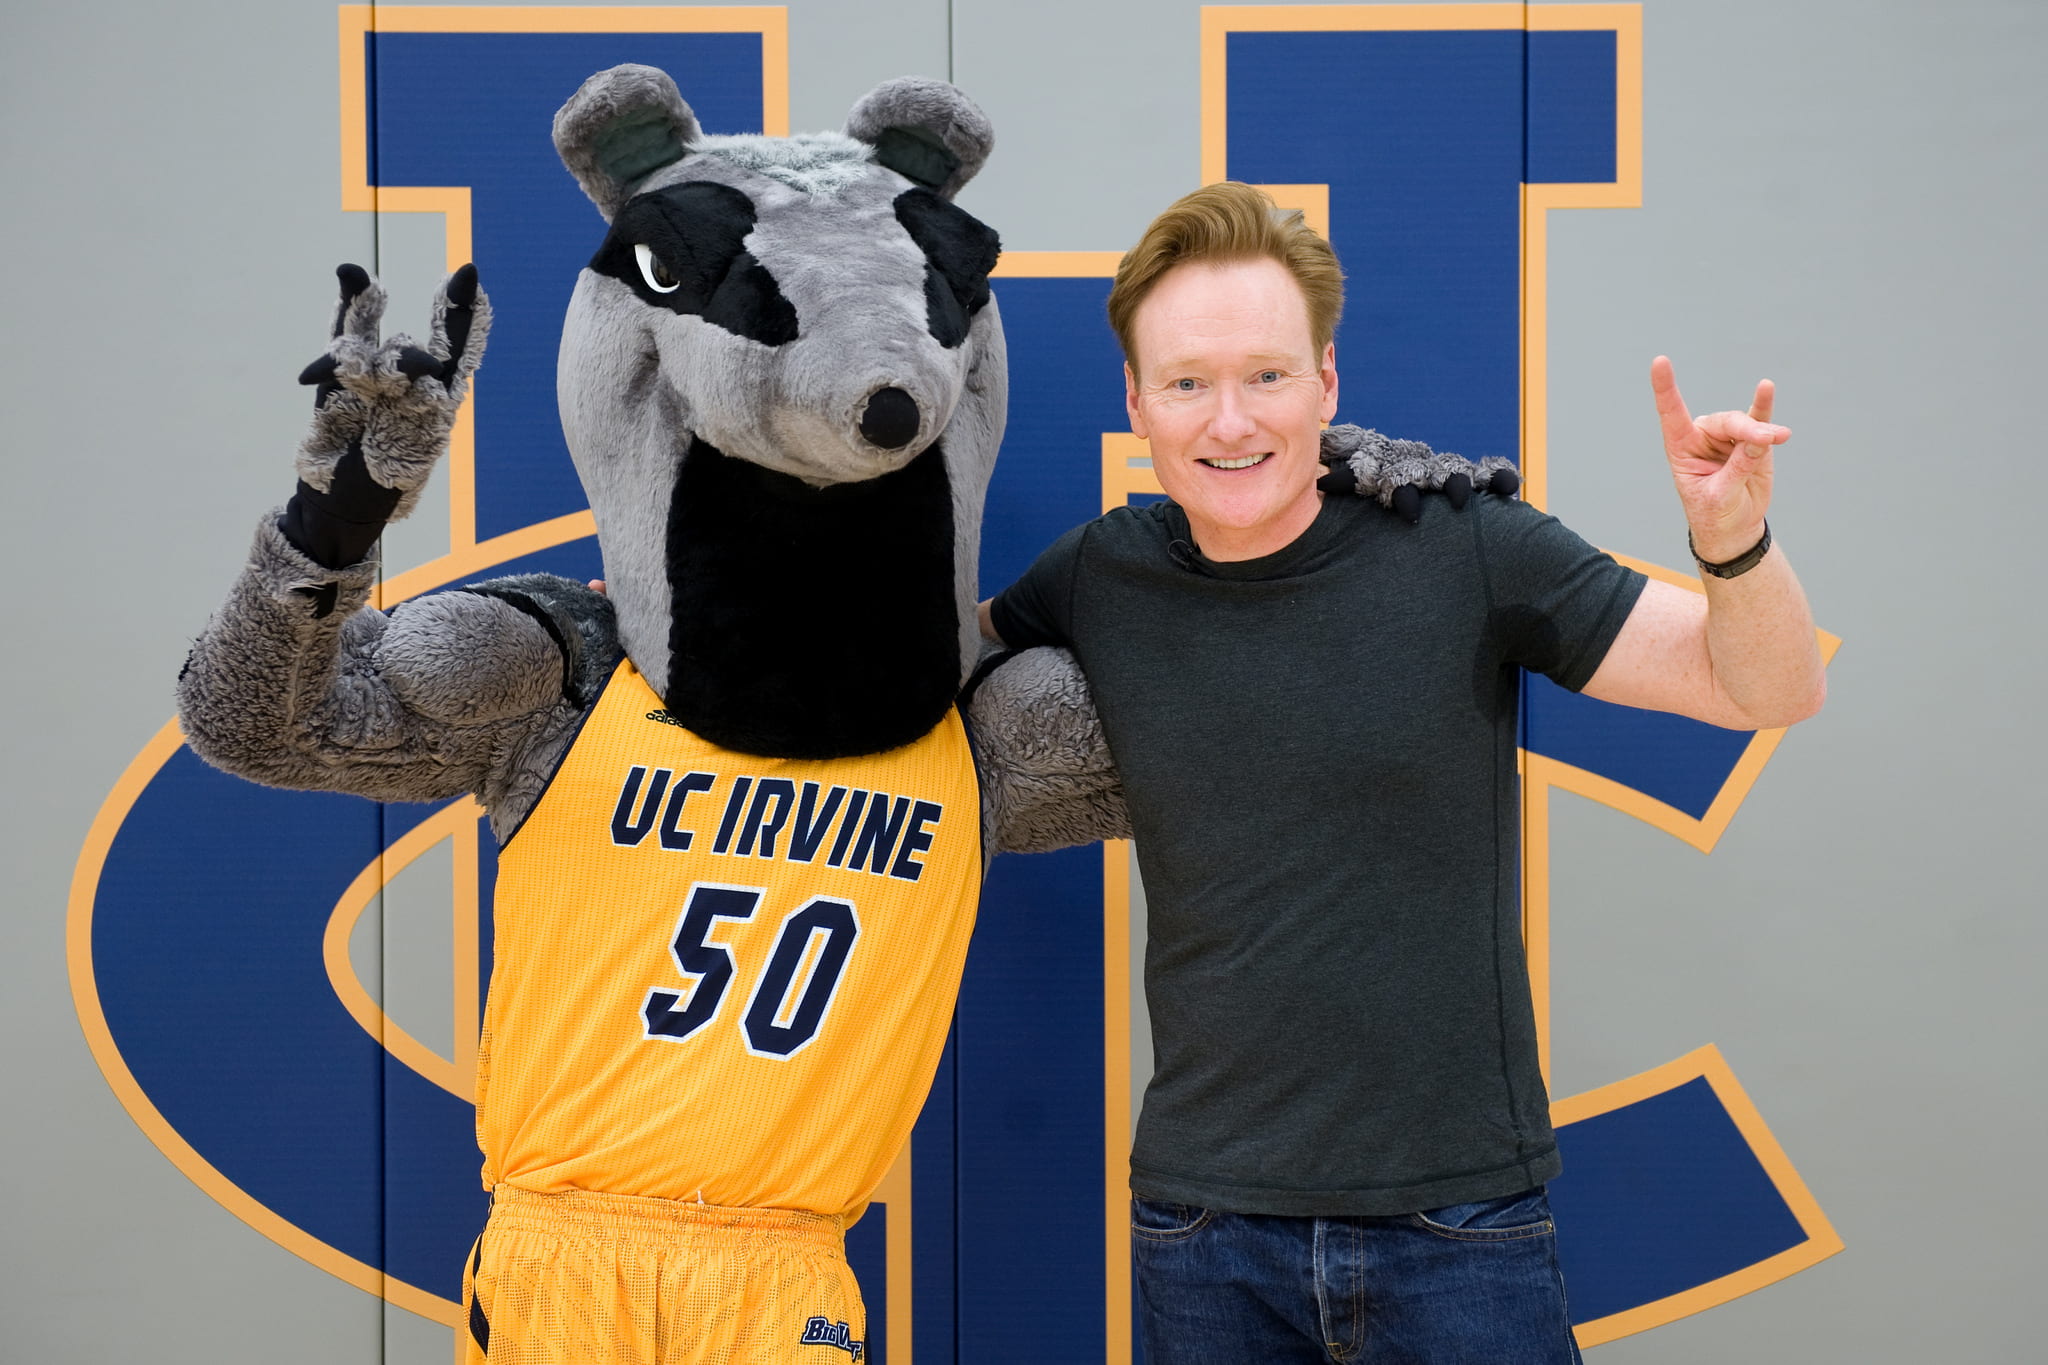 Conan O'Brien doing the Zot with Peter the Anteater